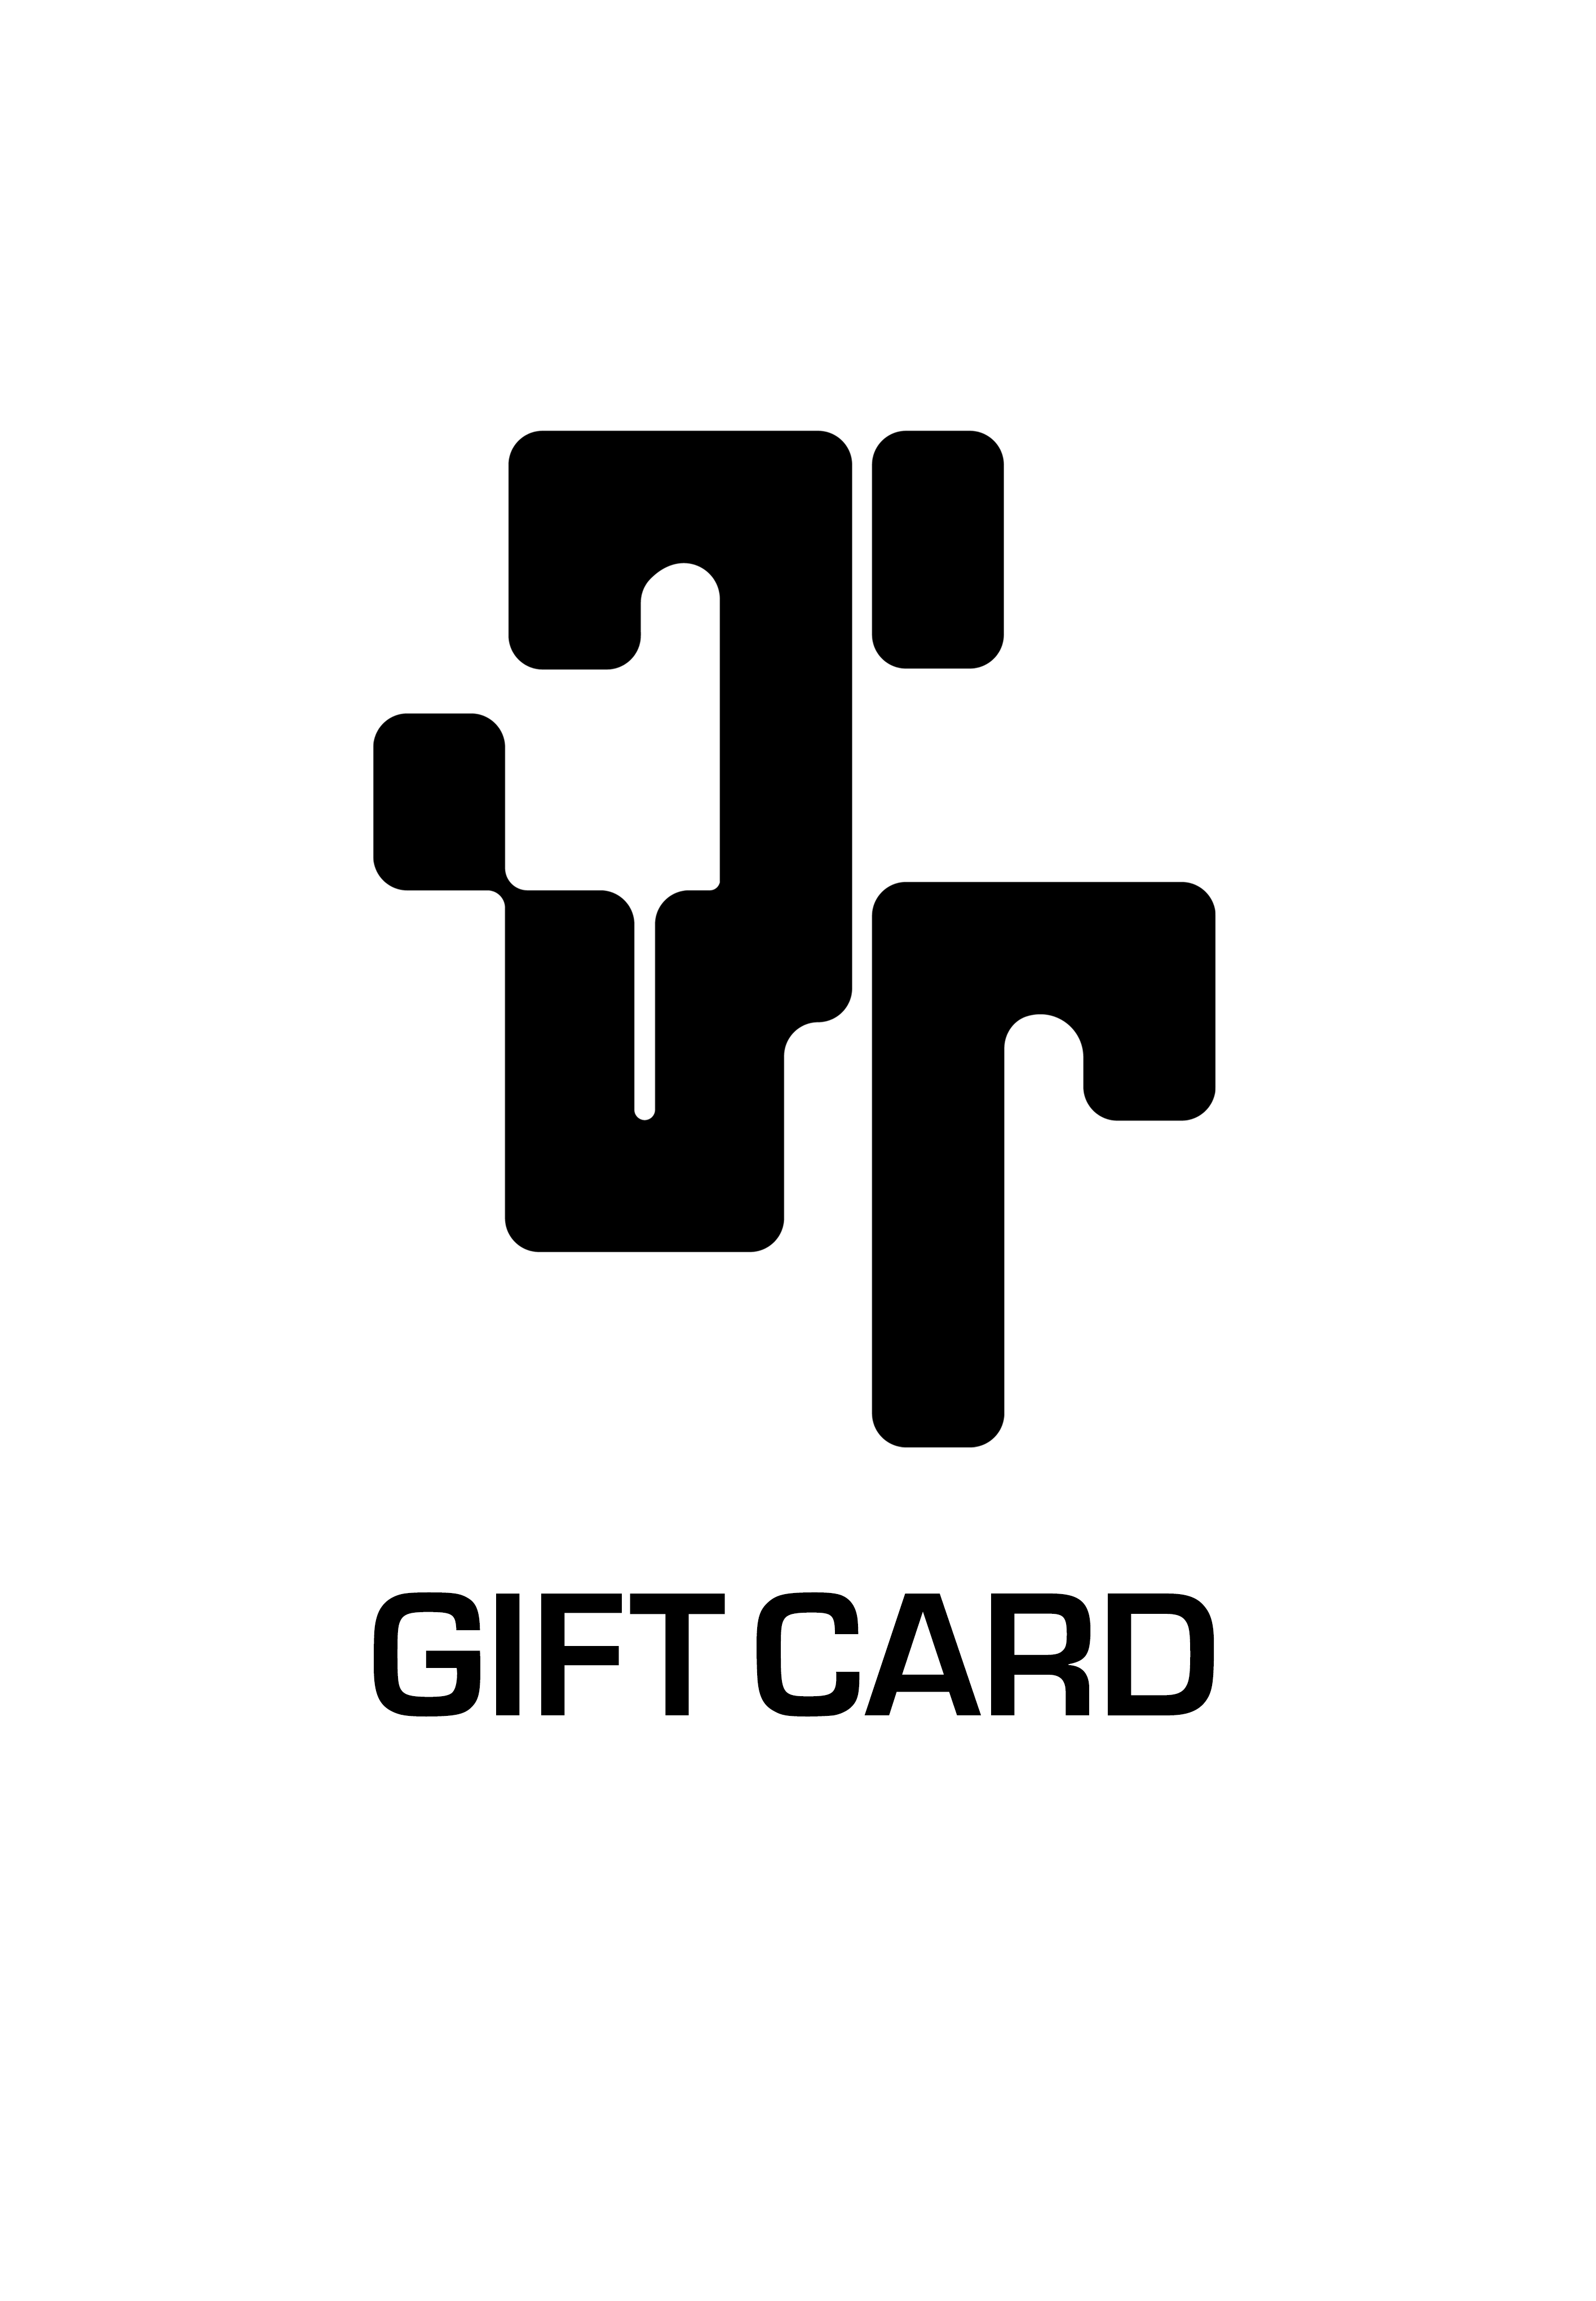 How To Get Gift Cards Online - Cardtonic